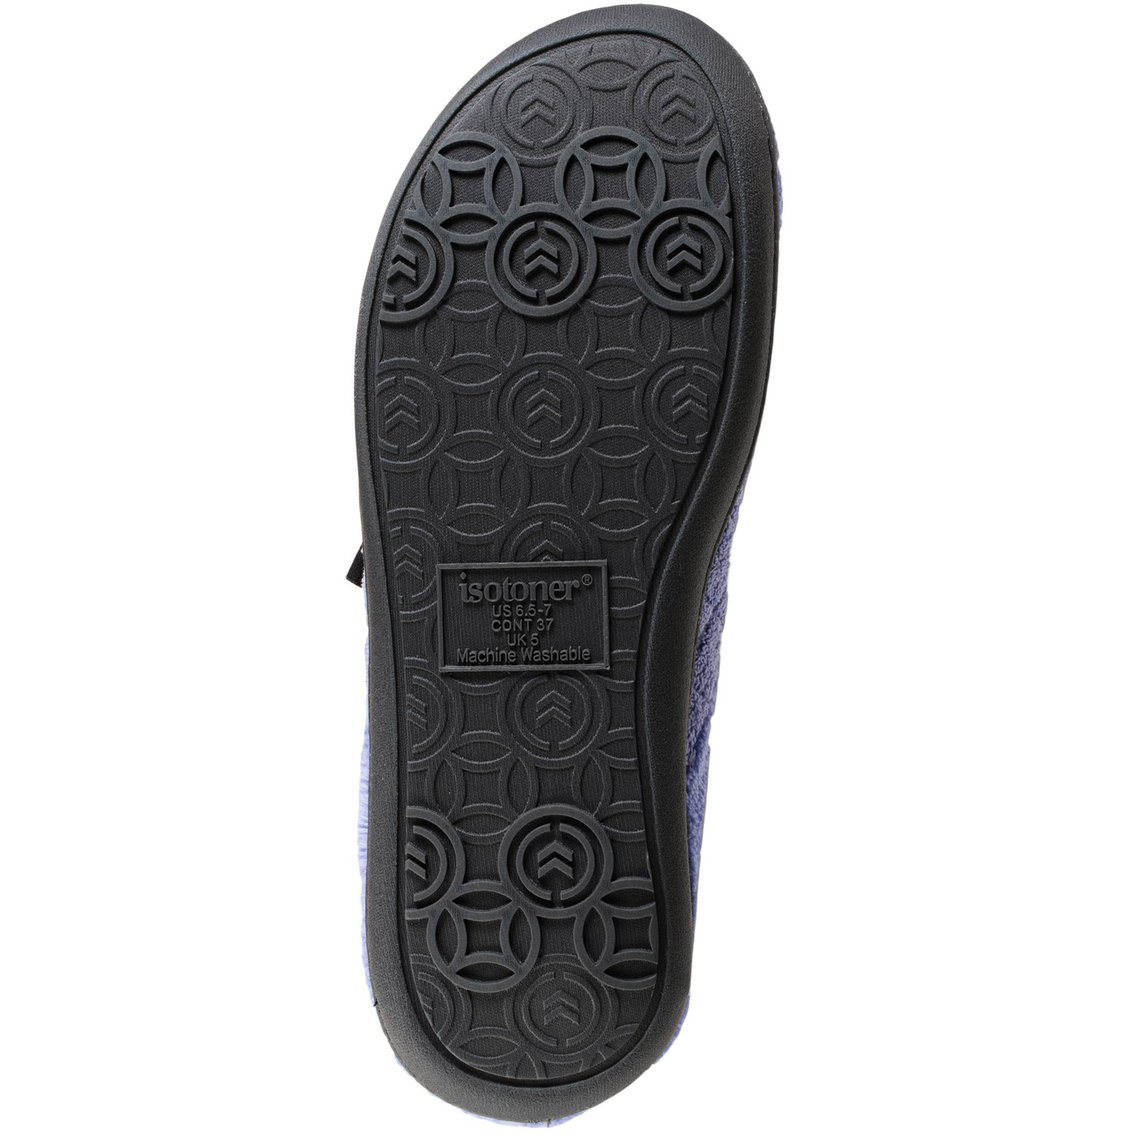 Isotoner Totes Women's Memory Foam Microterry Milly Hoodback Slippers - Image 3 of 3